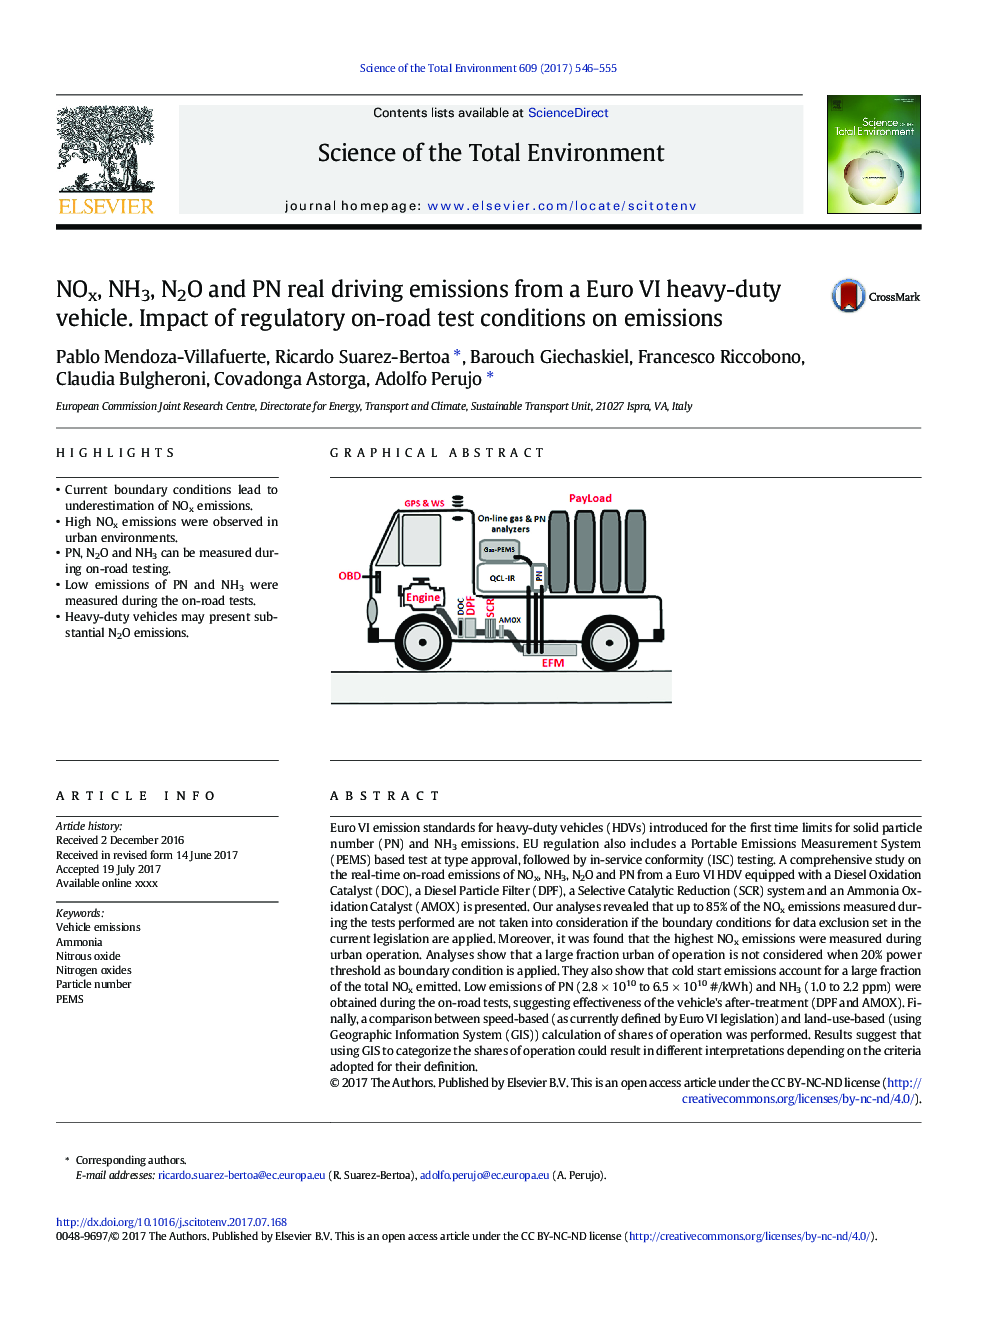 NOx, NH3, N2O and PN real driving emissions from a Euro VI heavy-duty vehicle. Impact of regulatory on-road test conditions on emissions